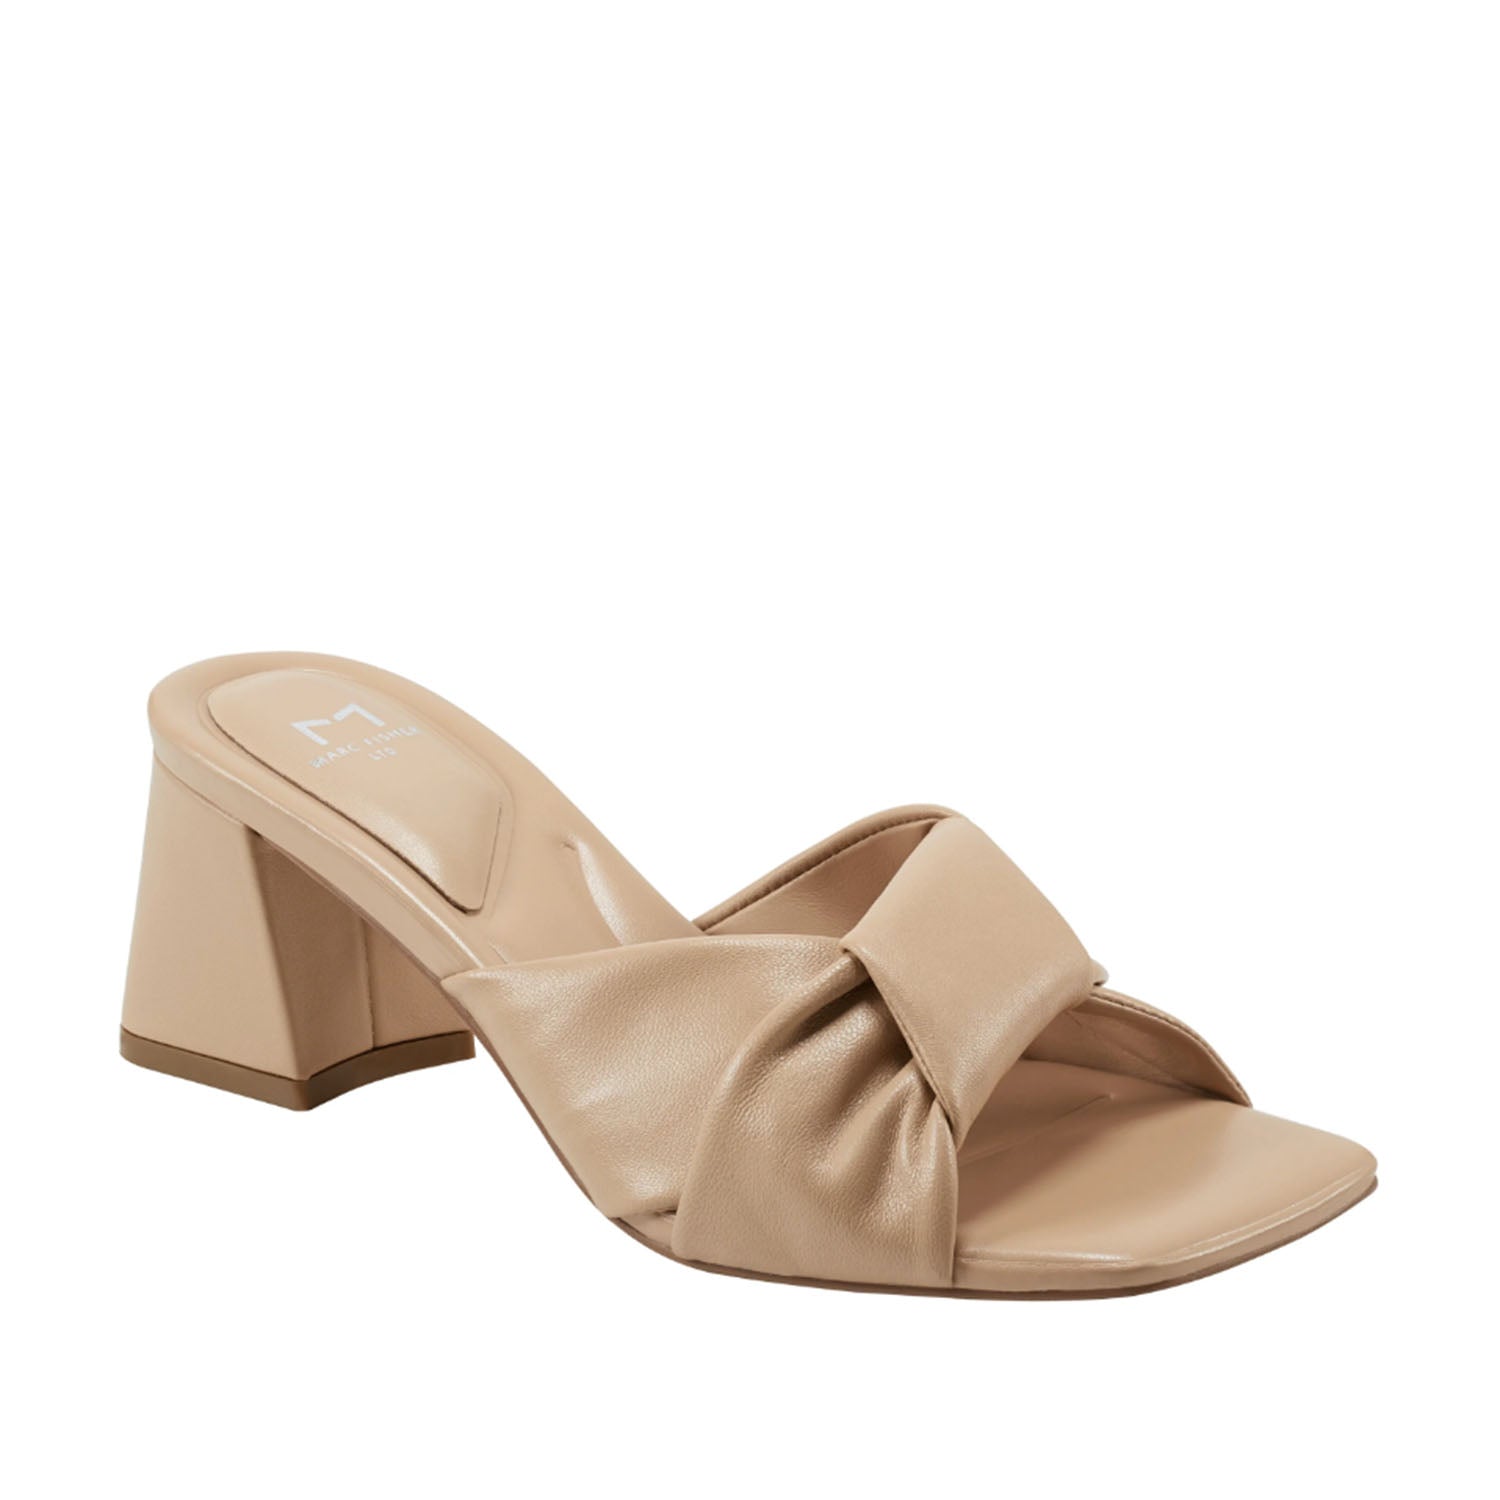 Marc Fisher Women's Calia in Light Natural Sandals MARC FISHER 